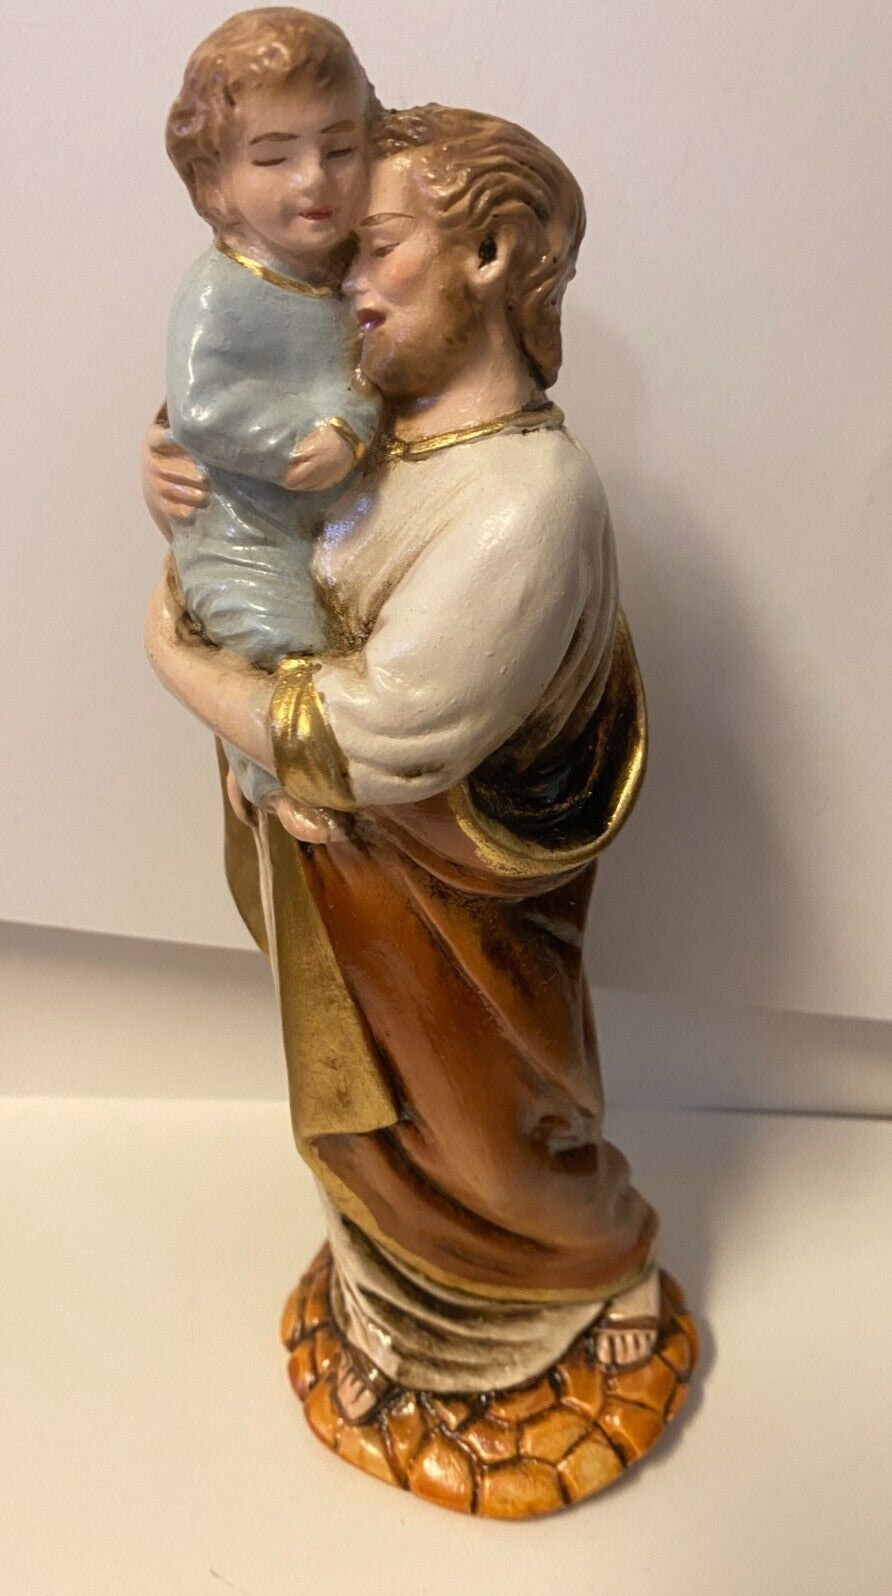 Saint Joseph with Child "A Father's Hug", 7.25" Statue, New from Colombia - Bob and Penny Lord